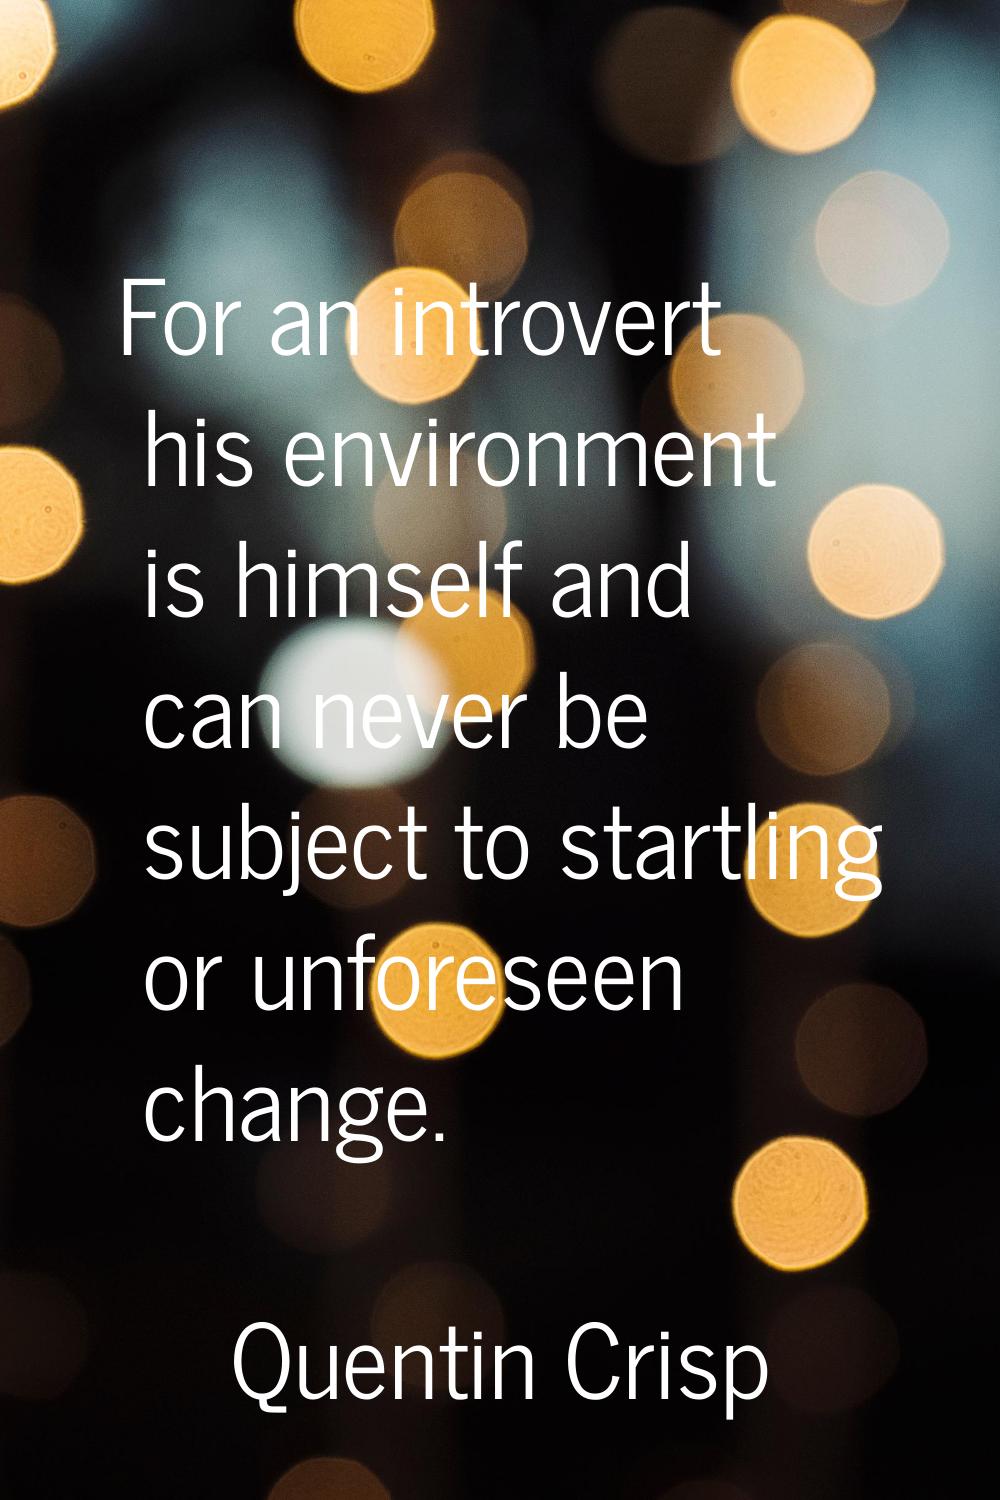 For an introvert his environment is himself and can never be subject to startling or unforeseen cha